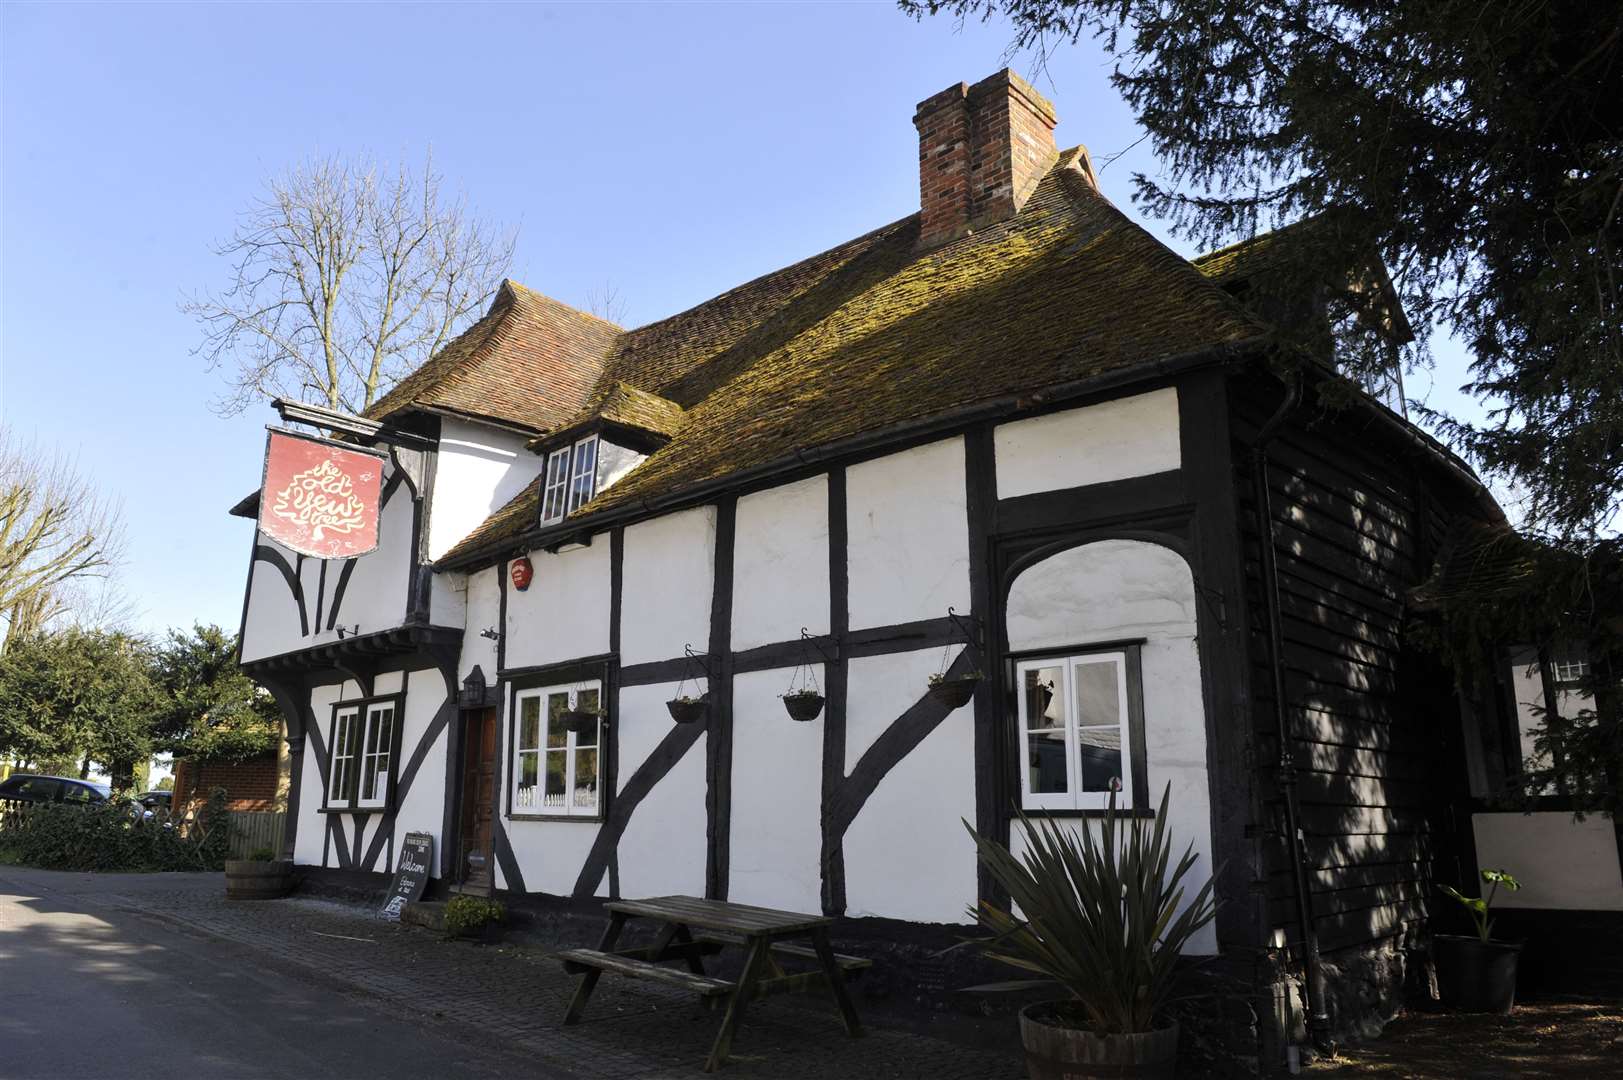 They've been downing pints at the Ye Olde Yew Tree Inn since 1348